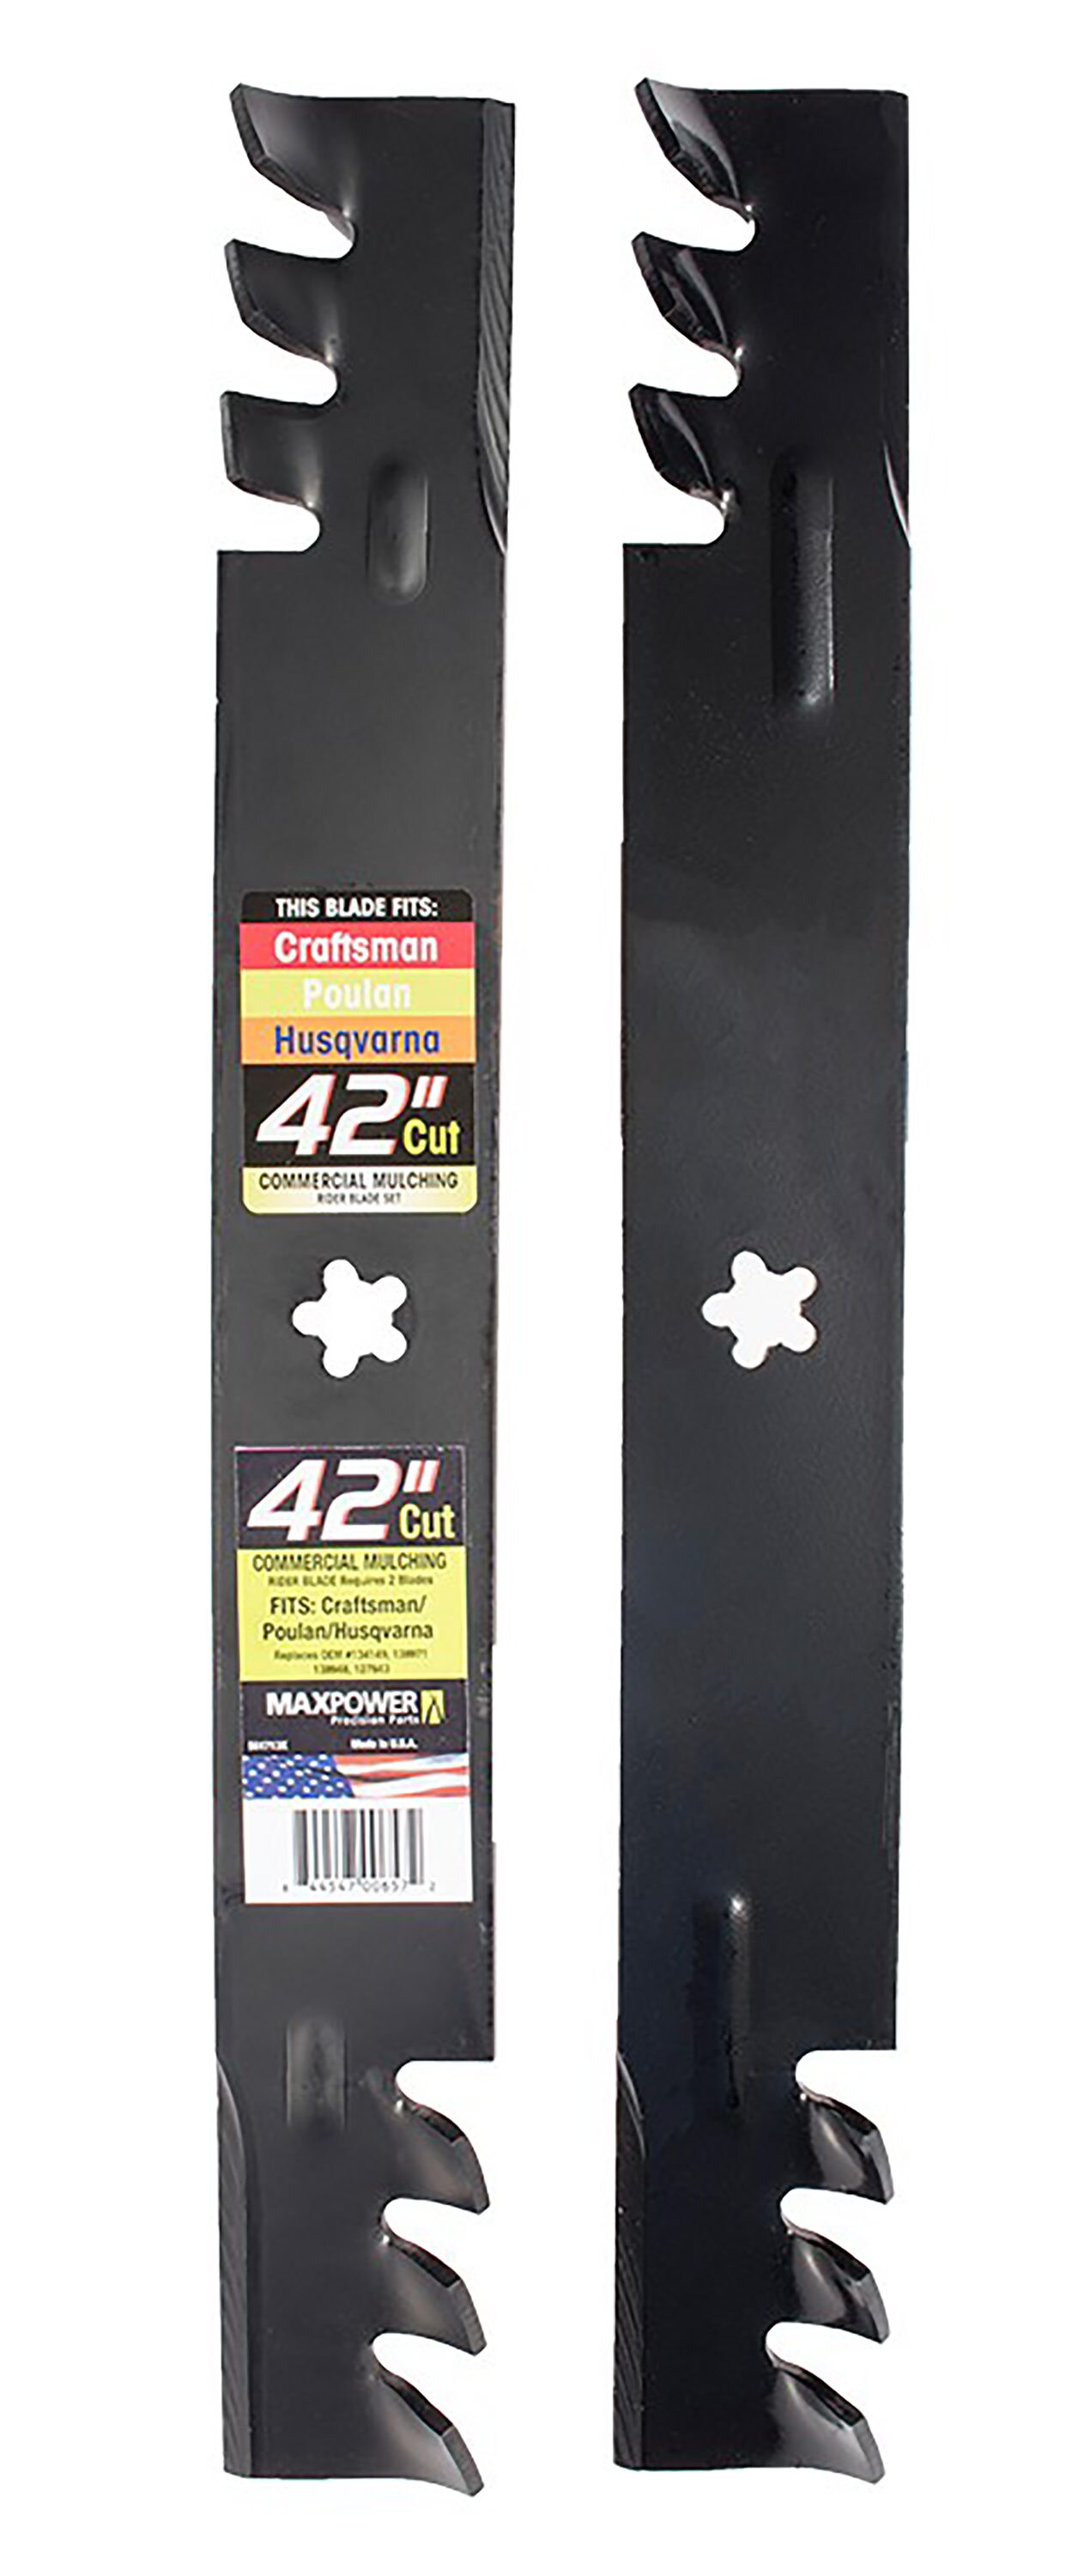 Maxpower 561713 2-Blade Set for 42-Inch Cut Poulan Husqvarna Replaces 138971 and 138498